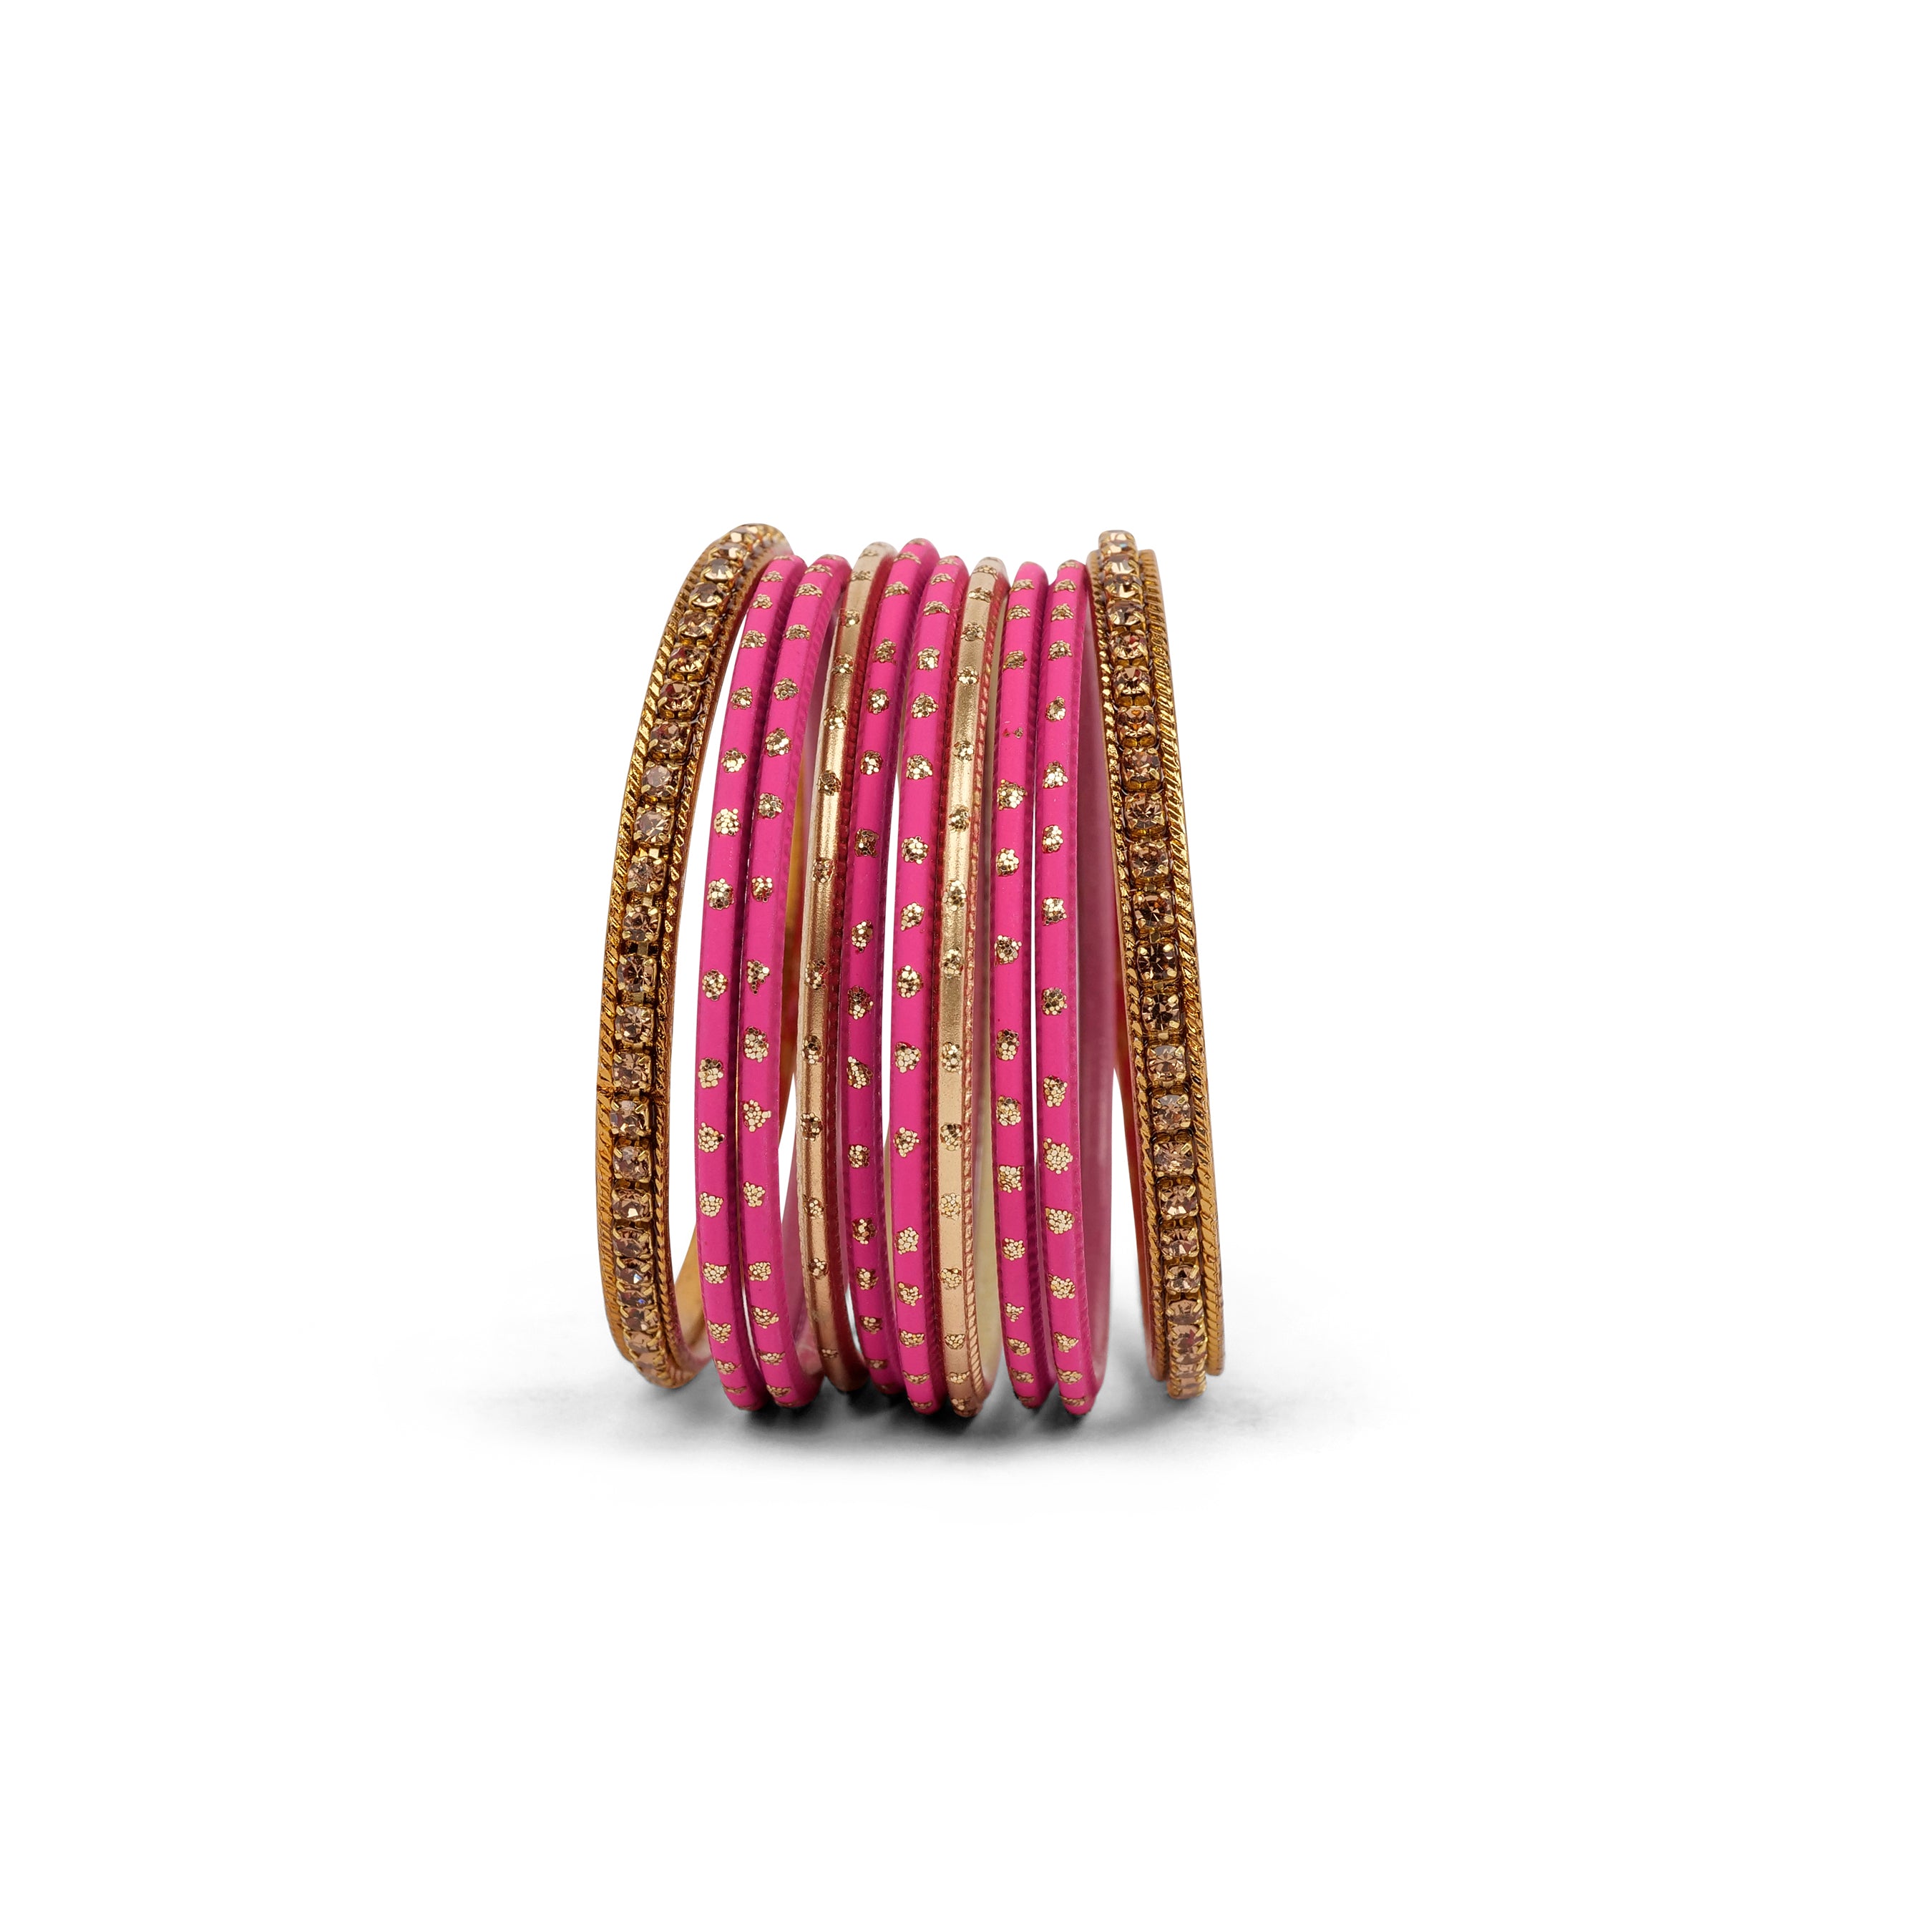 Children's Bangle Set in Hot Pink and Antique Gold